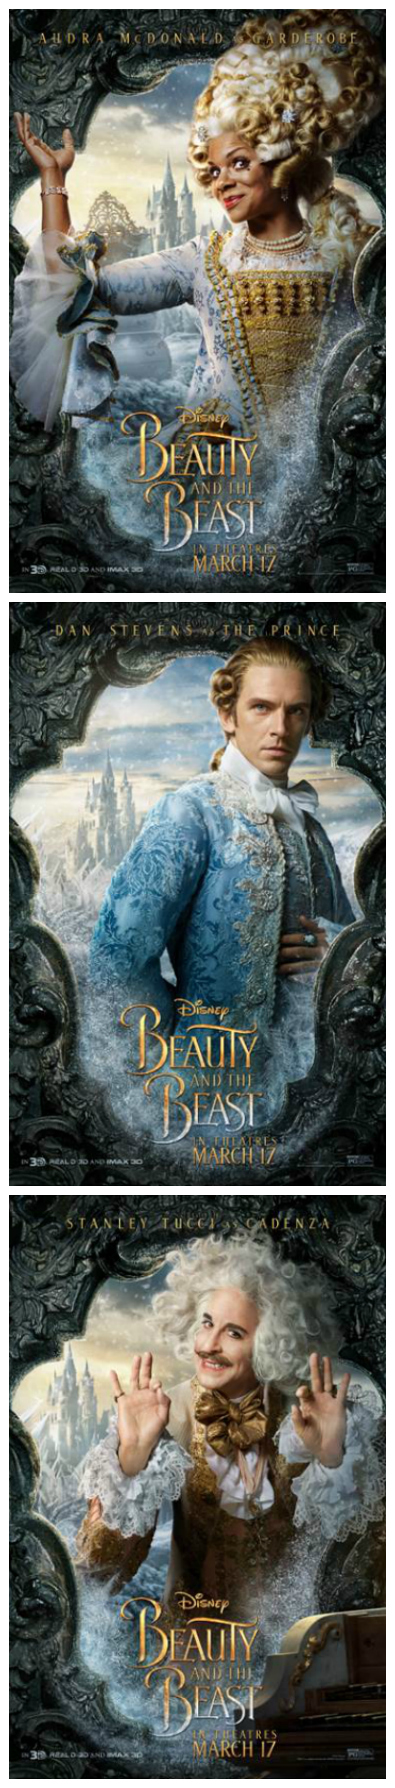 New Disney Beauty and The Beast Posters - See the Cast!